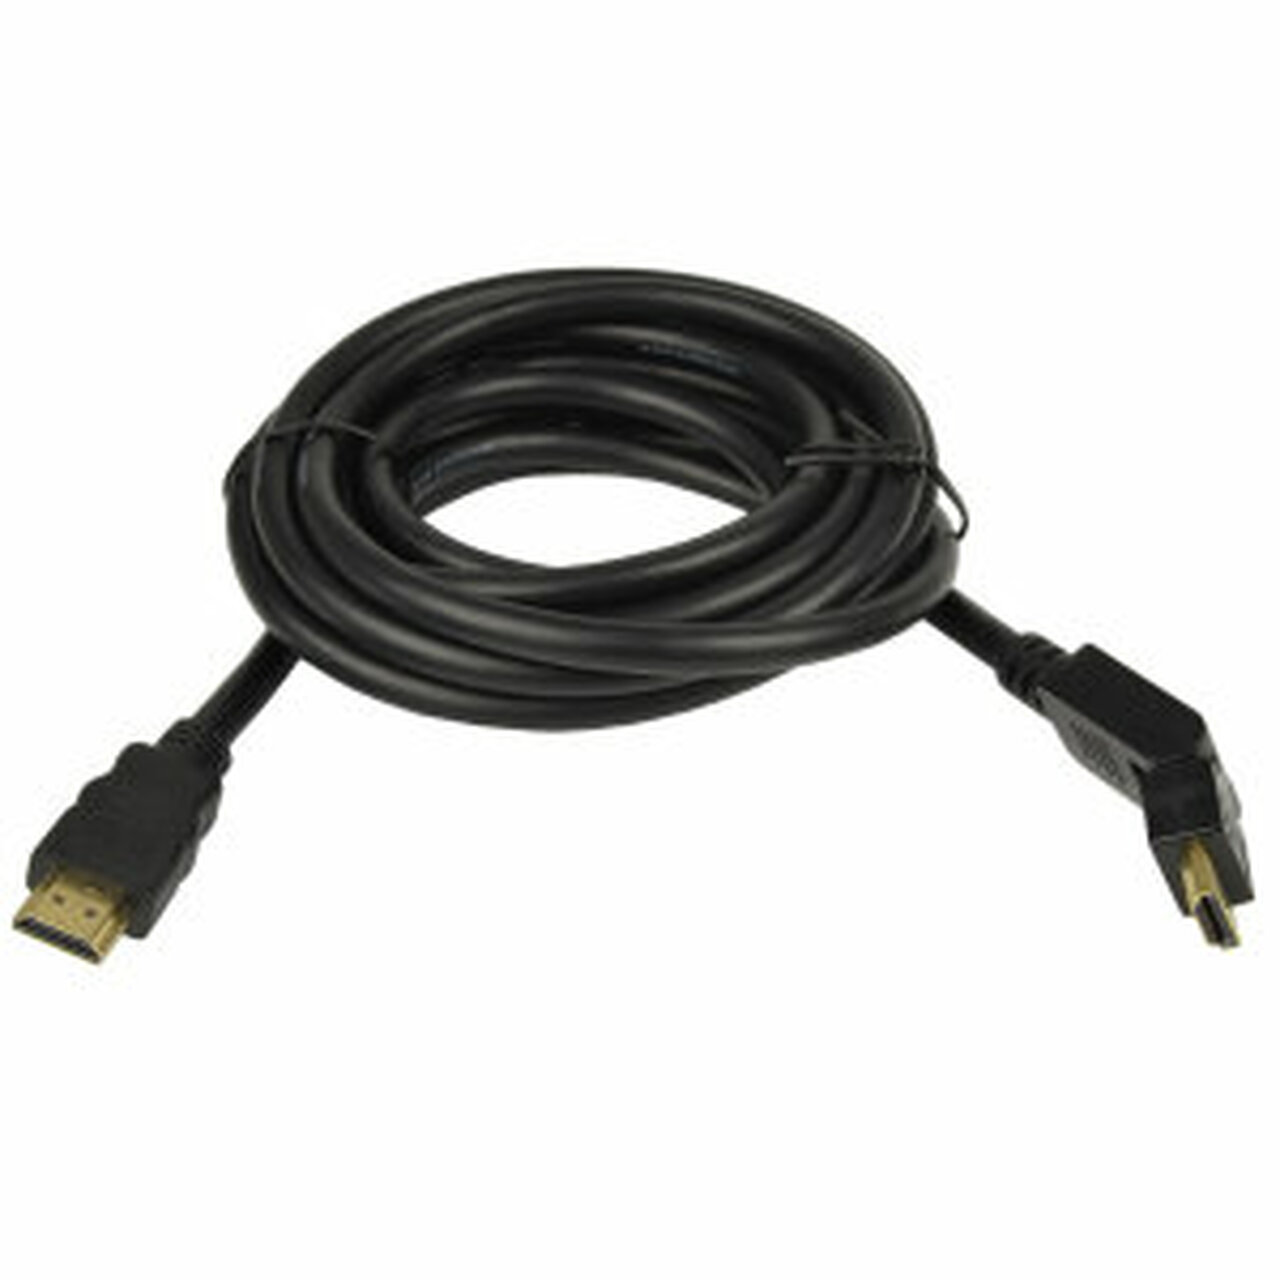 9.8' Sanus EHDF-9.8ft Pivoting 4K High Speed HDMI Cable